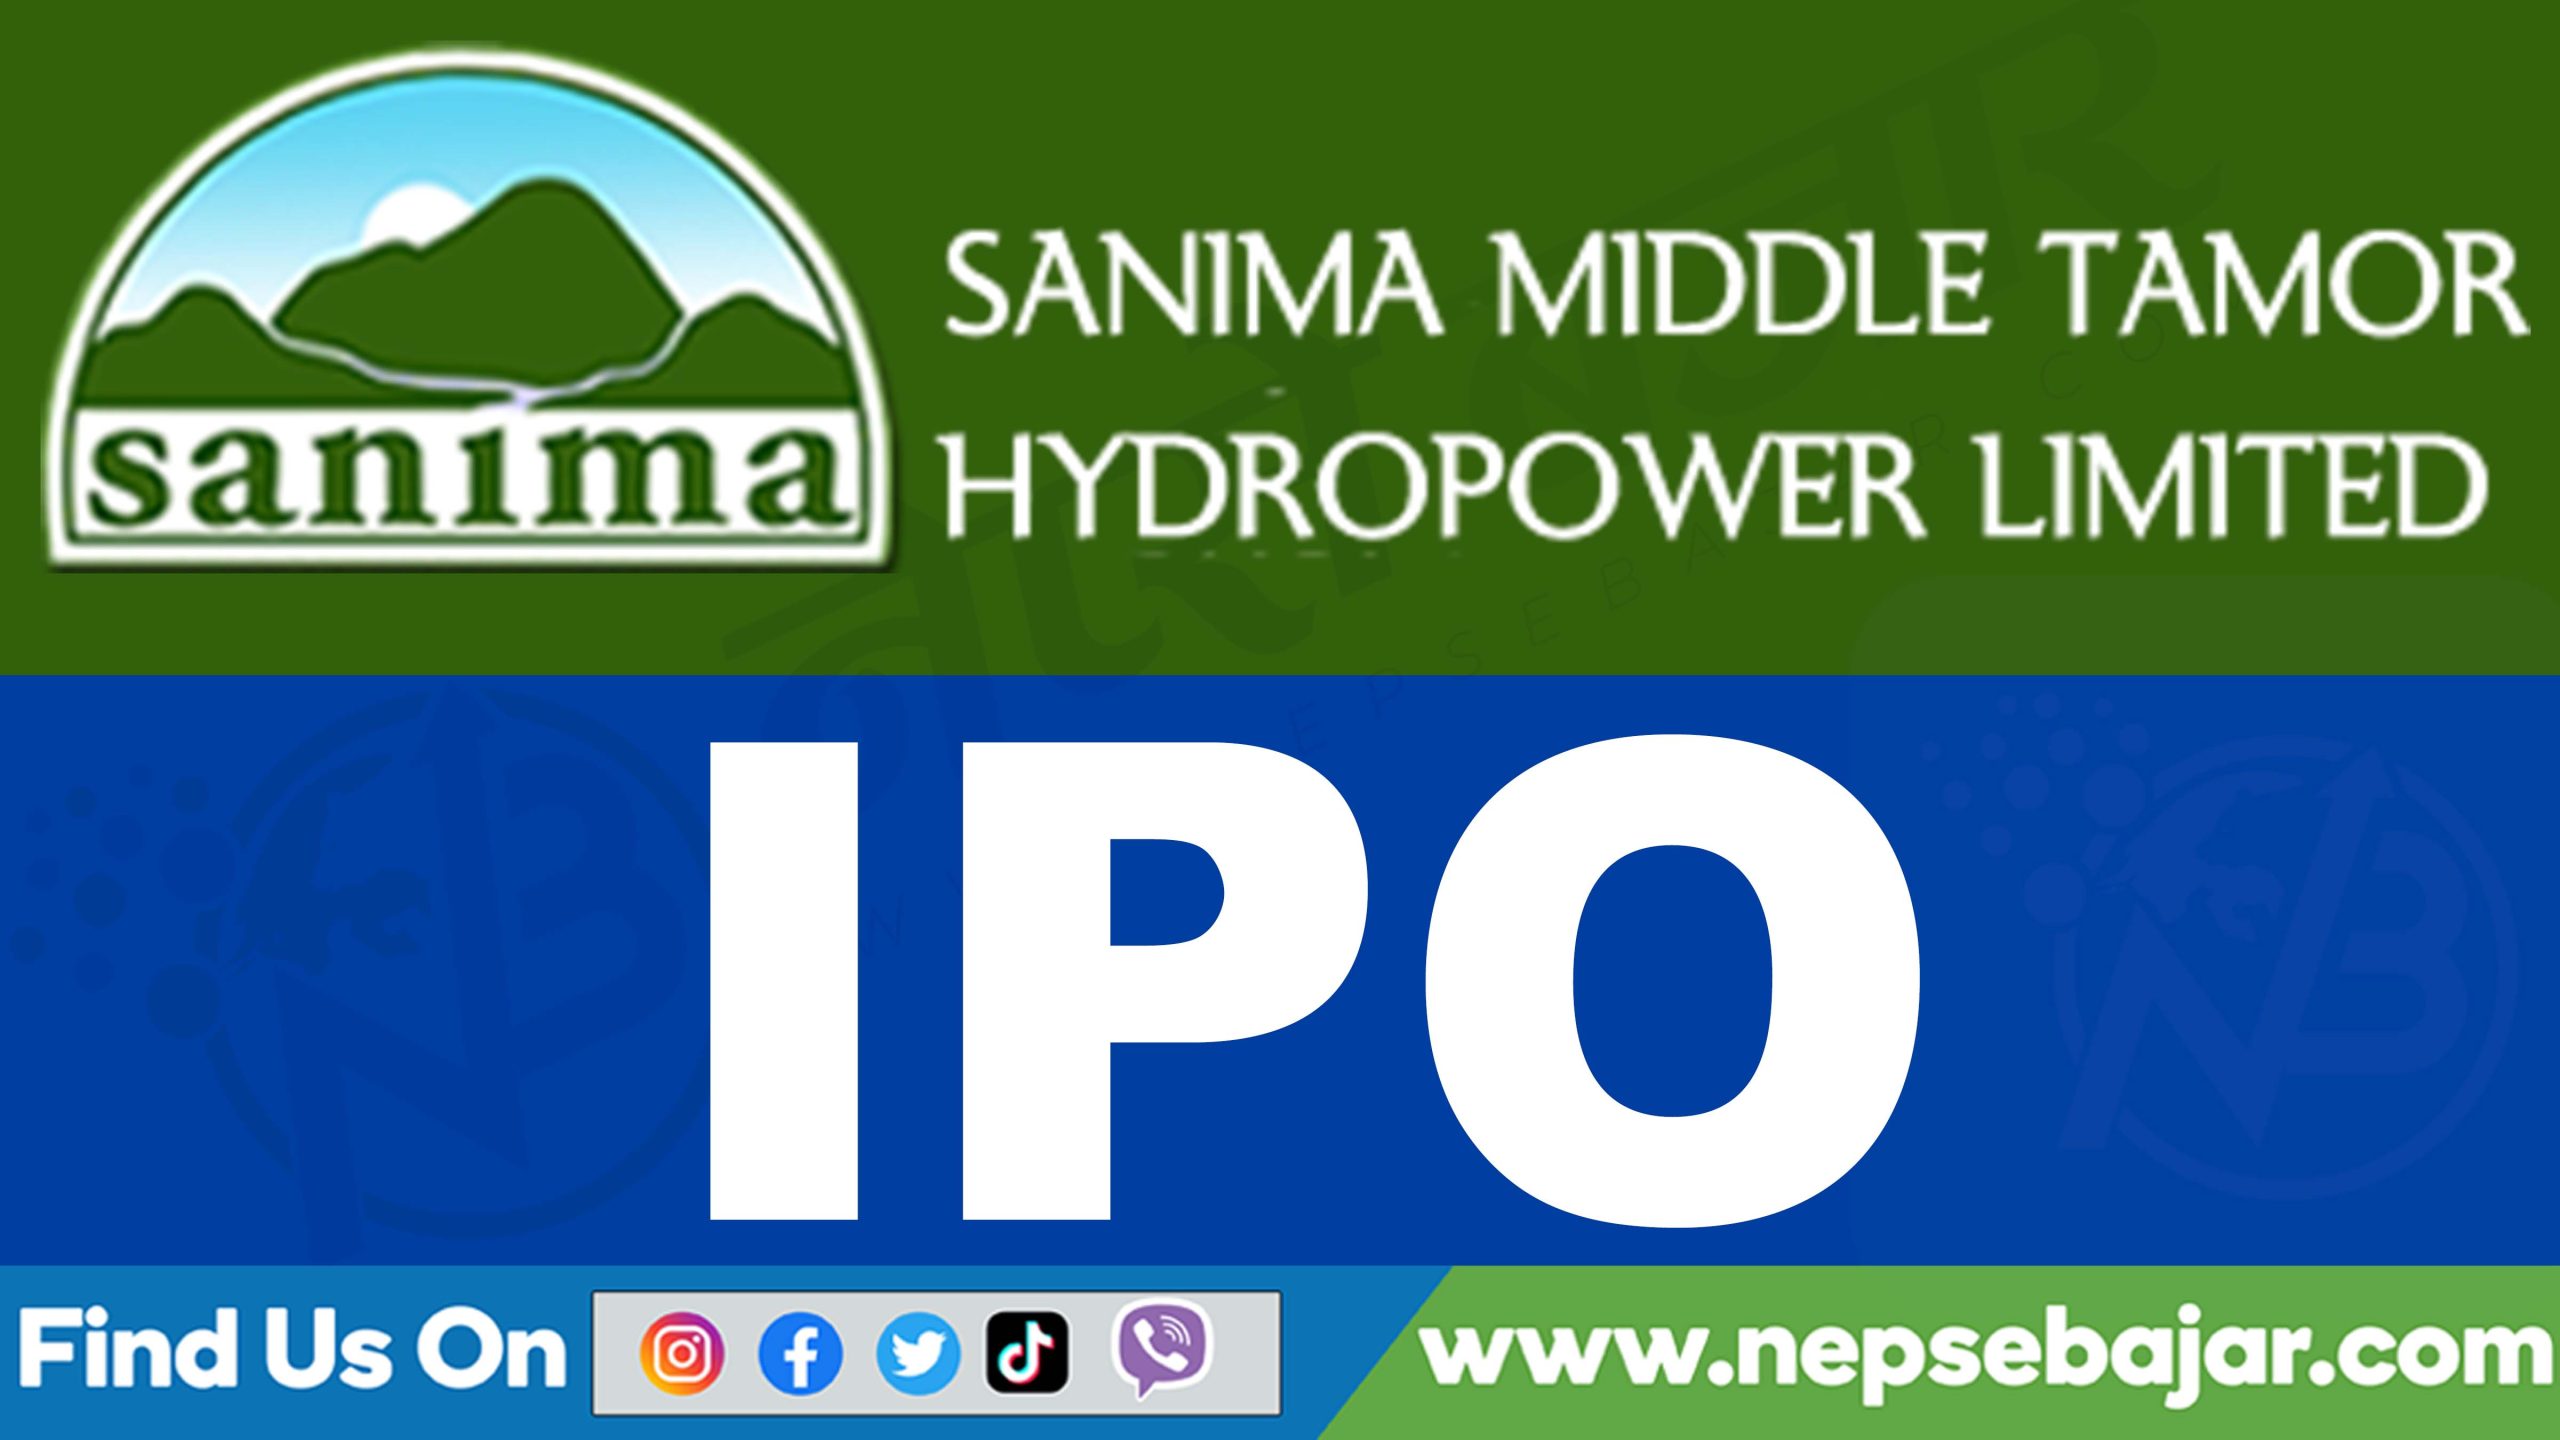 Sanima Middle Tamor Hydropower Will Issue an IPO from Tomorrow .